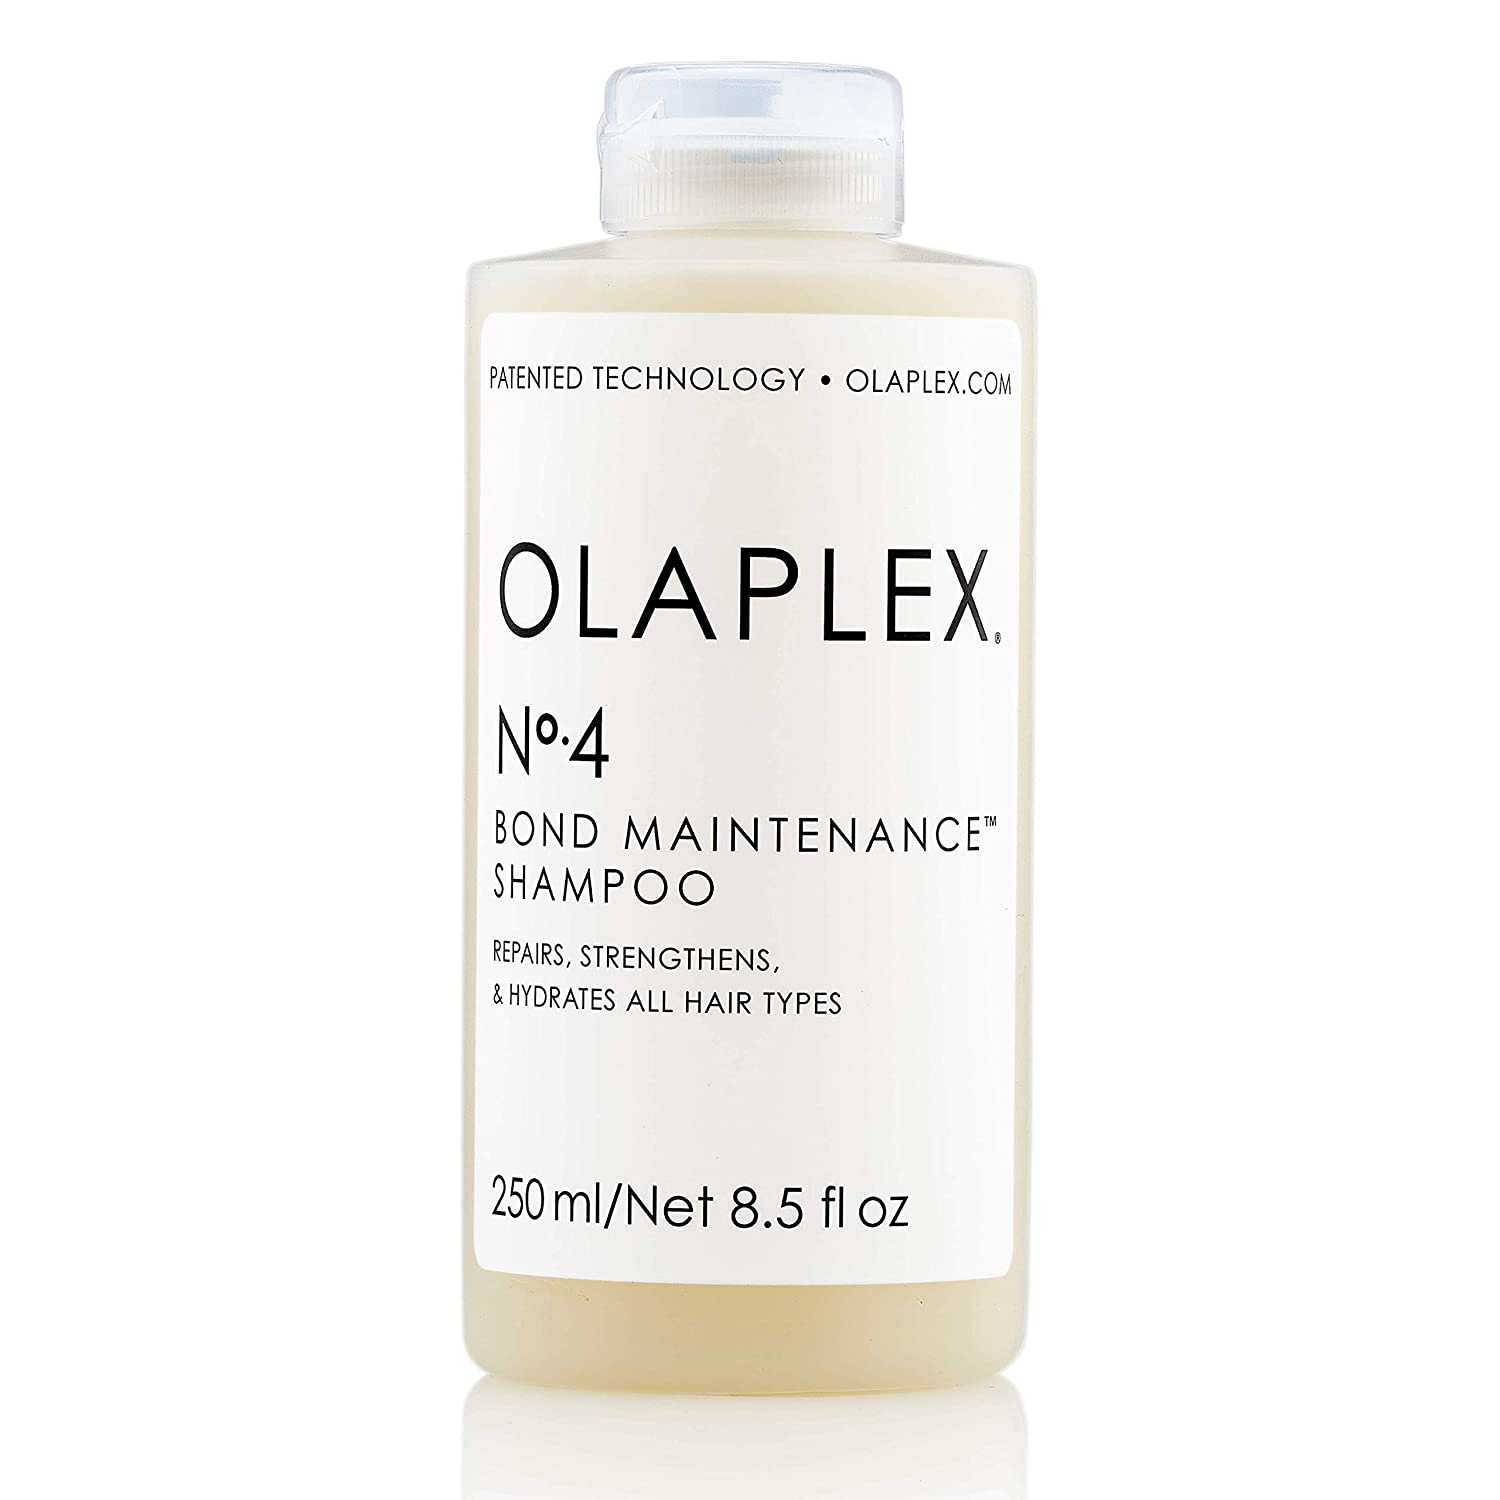 OLAPLEX 4 - BOND MAINTENANCE SHAMPOO 250ML Protects and repairs damaged hair, split ends and frizz by re-linking broken bonds. A highly-moisturizing, reparative shampoo that leaves hair easy to manage, shiny and healthier with each use.